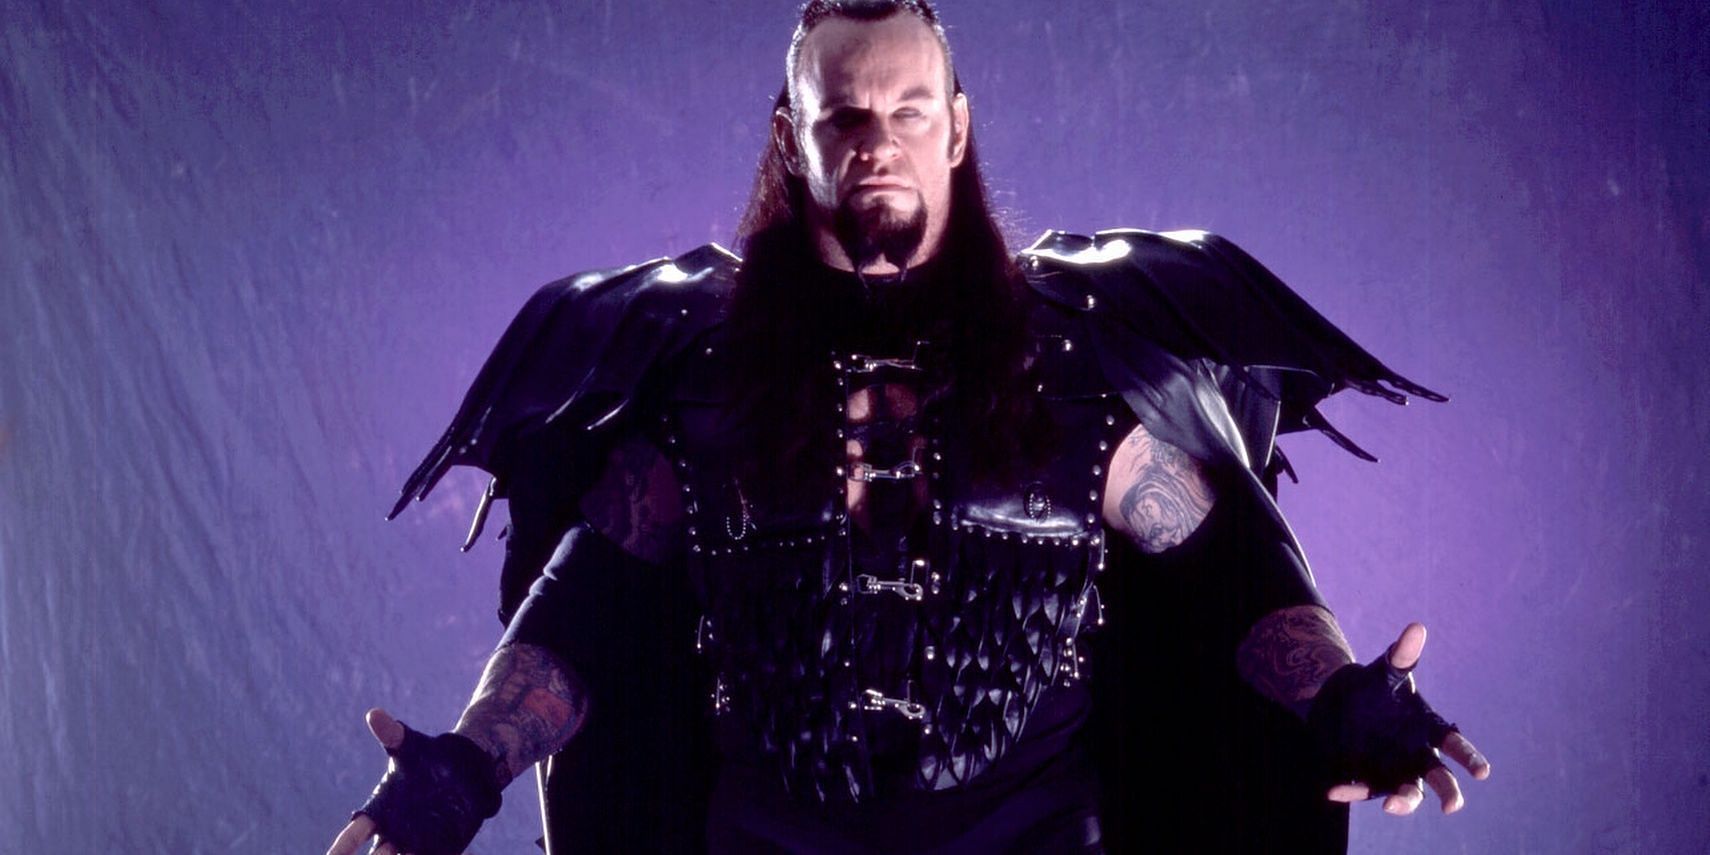 A fellow Hall of Famer has tweeted about The Deadman